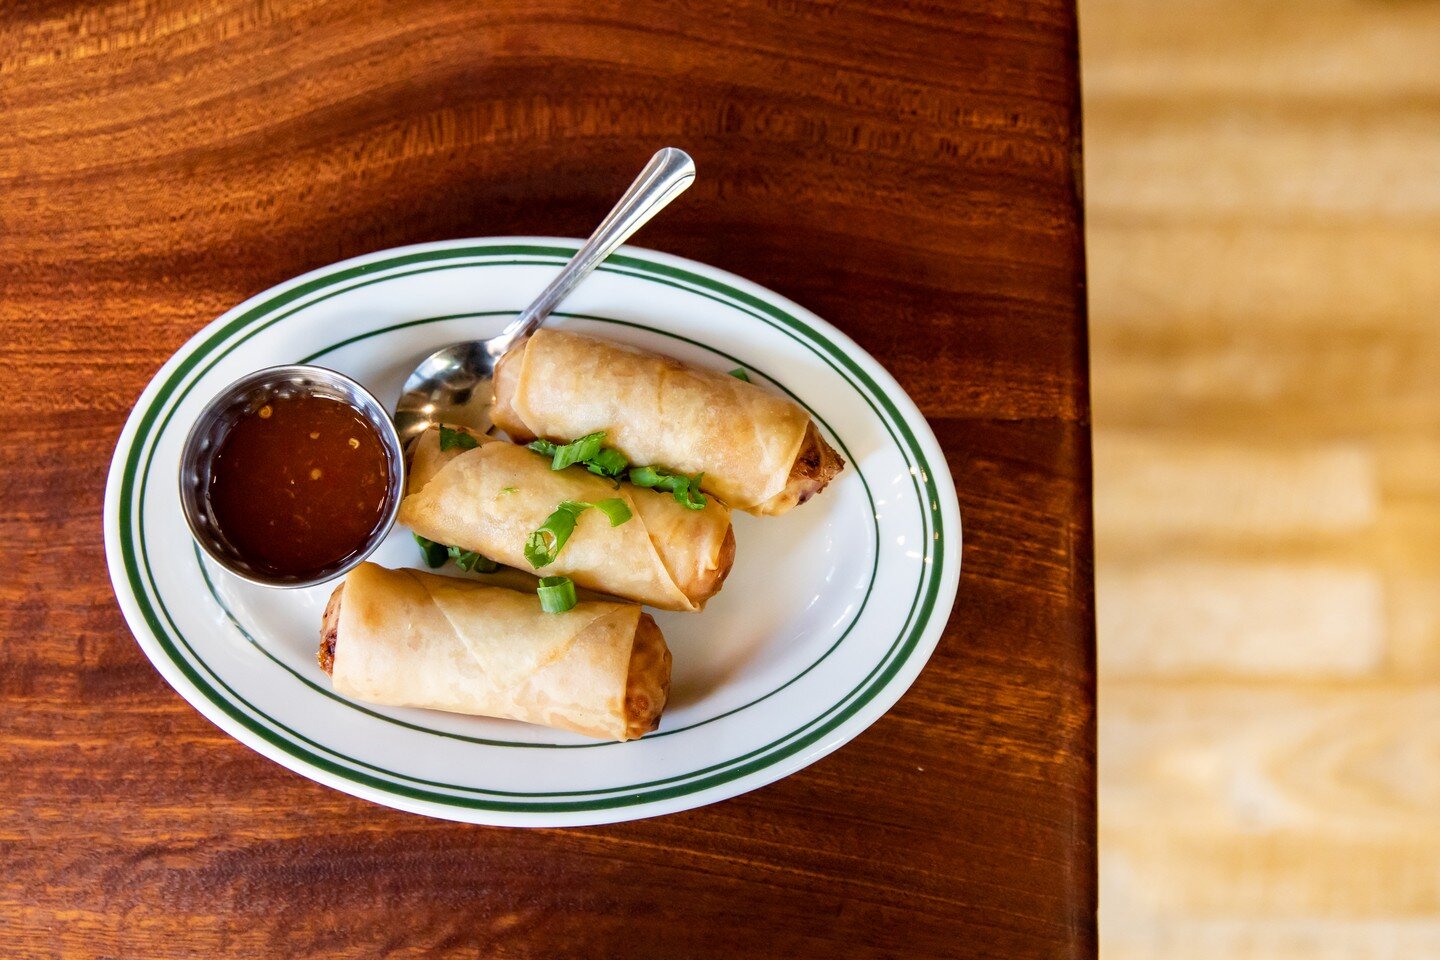 POPIA THOT, you&rsquo;ll love these delicately fried spring roll wrappers.

TO-GO / Delivery / Dinning
11A &ndash; Close

Web: www.thaipeacockpdx.com

#thaipeacock #thaipeacockpdx #pdxdining #eeeeeats #portlandfood #thaifood #pdxeats #portlandfoodie 